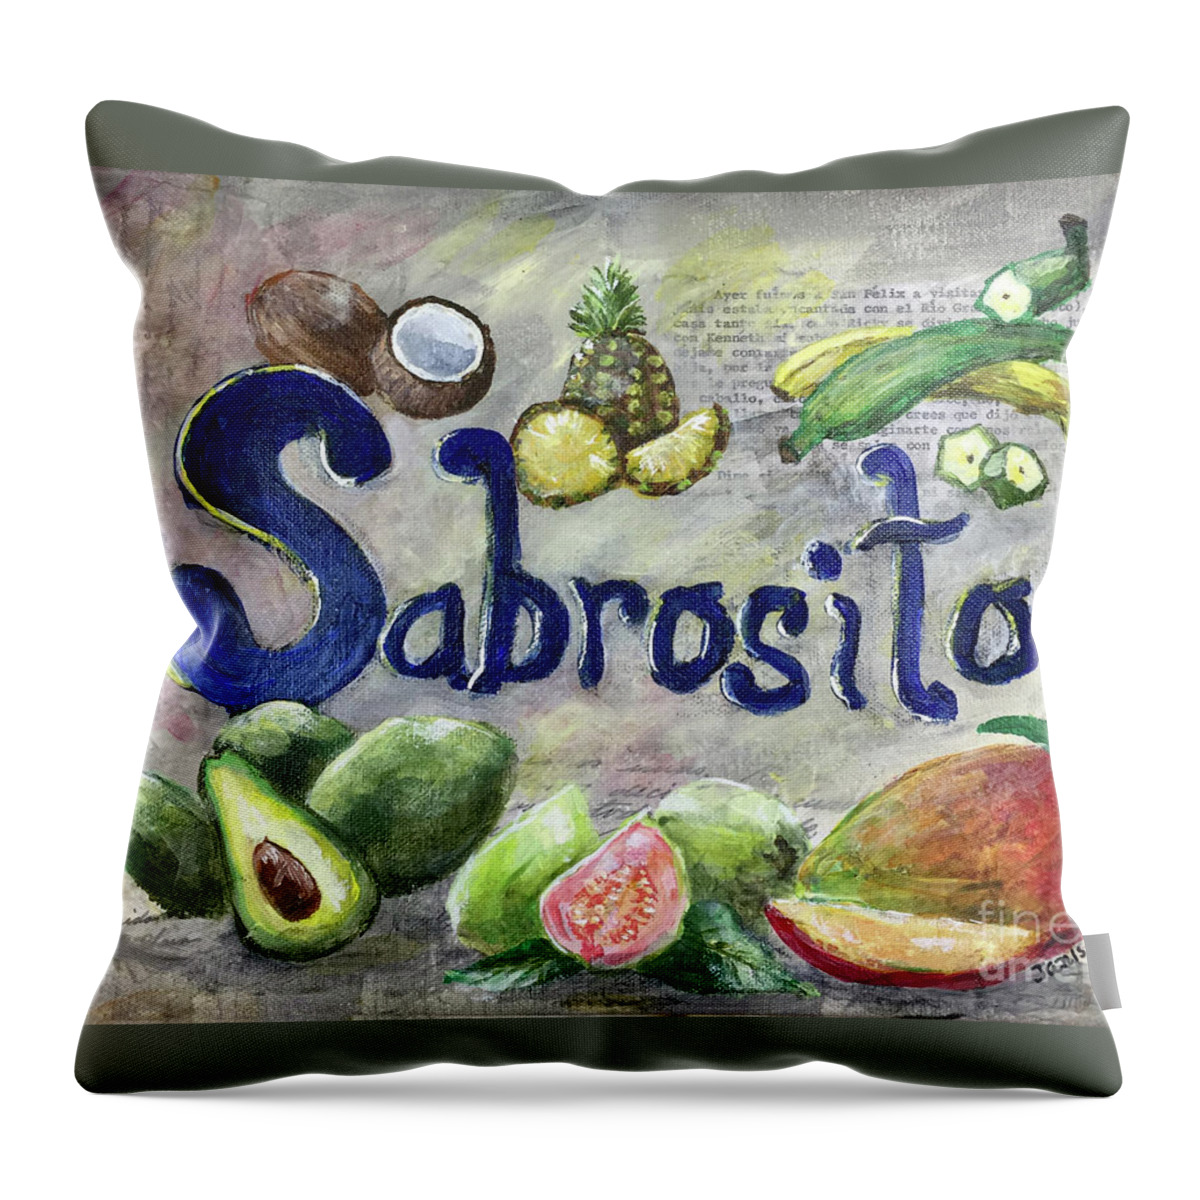 Sabroso Throw Pillow featuring the mixed media Sabrosito by Janis Lee Colon